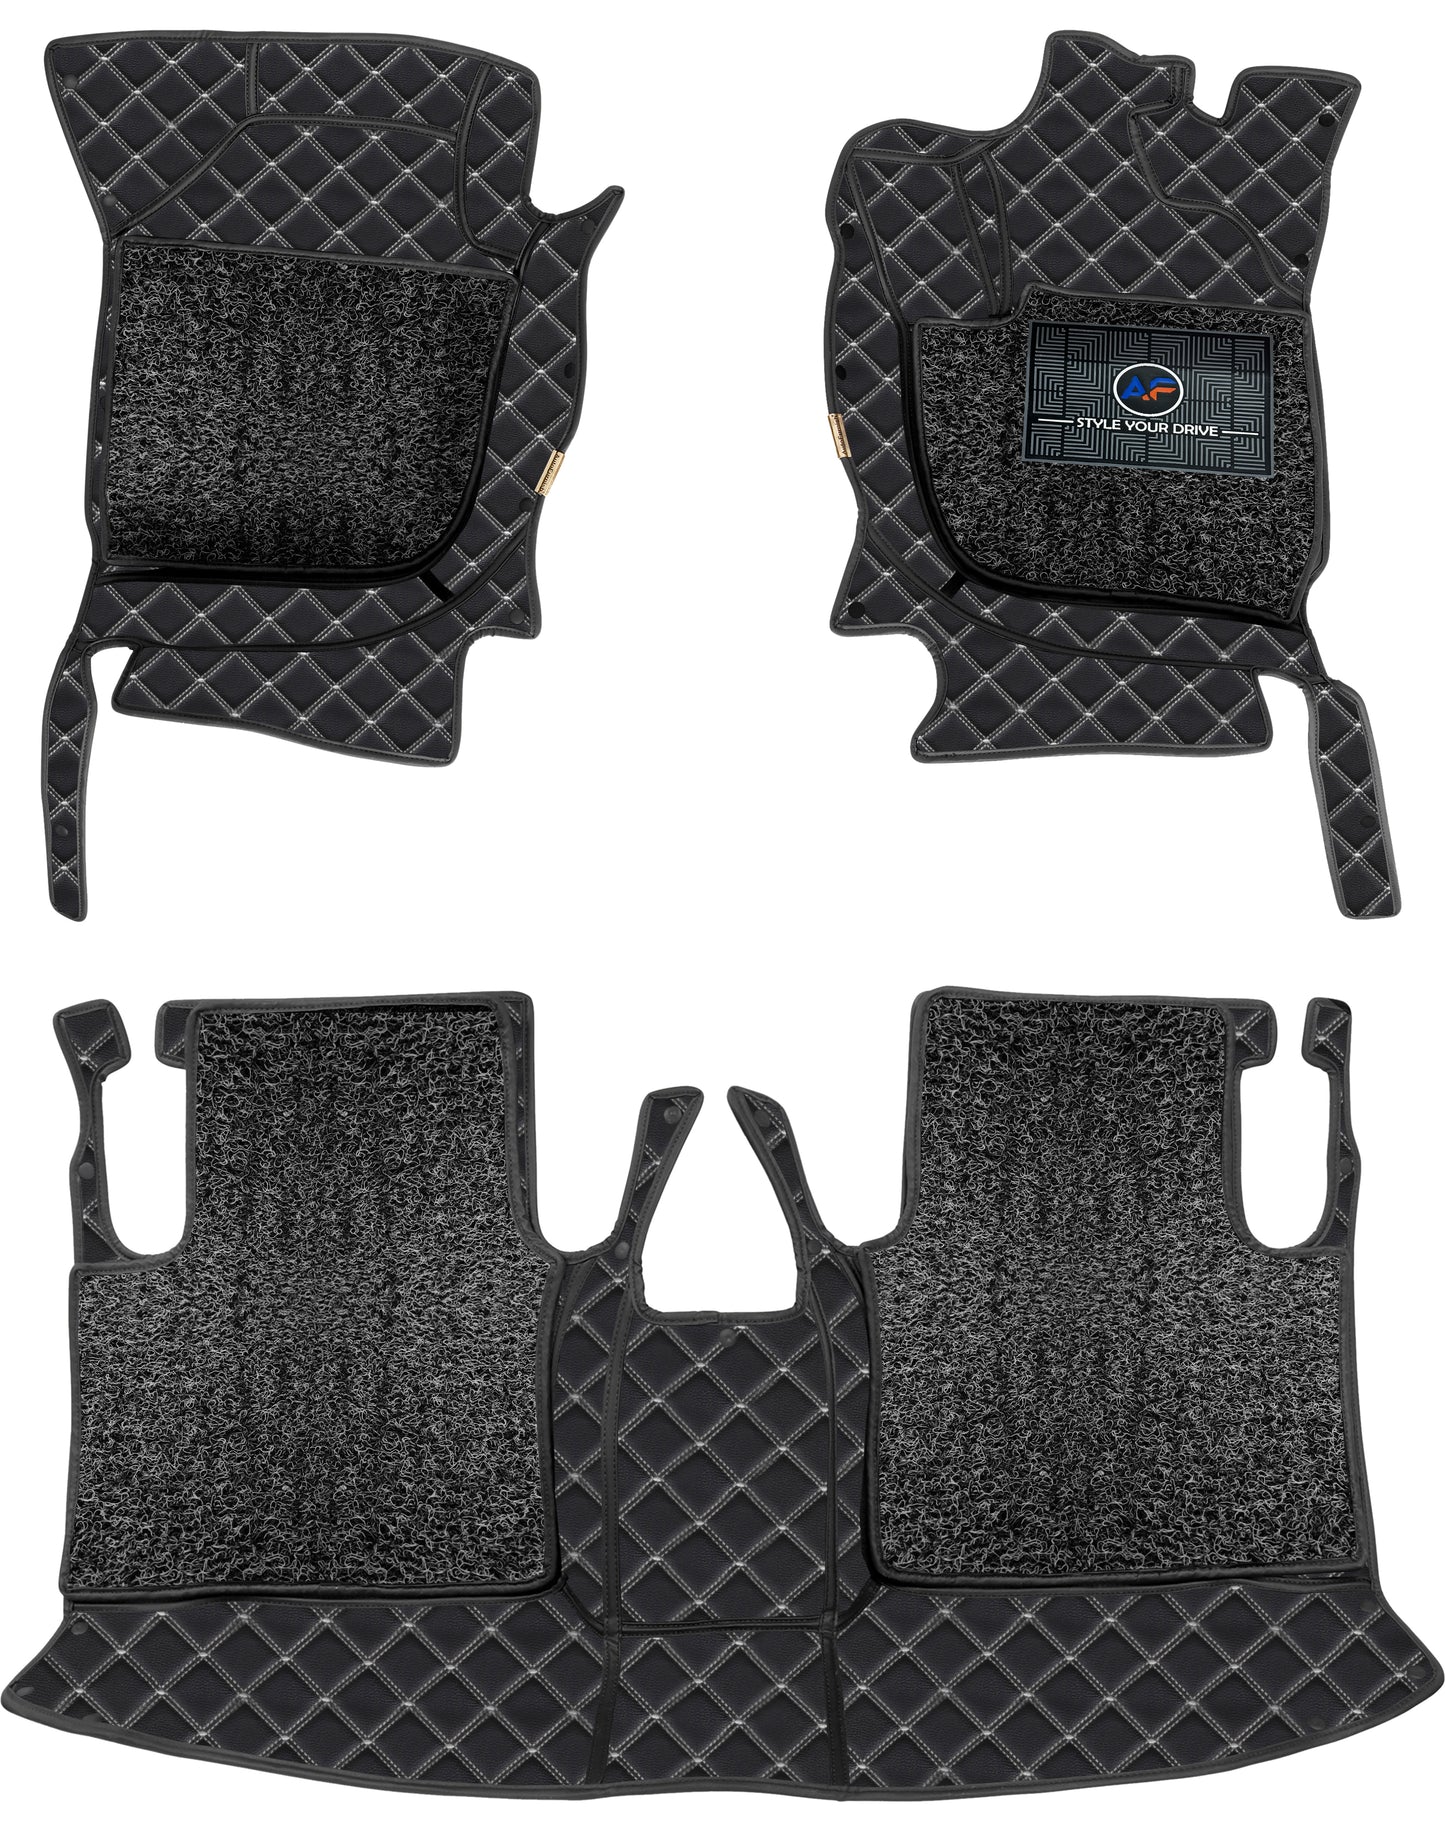 Hyundai Grand i10 2013-19-7D Luxury Car Mat, All Weather Proof, Anti-Skid, 100% Waterproof & Odorless with Unique Diamond Fish Design (24mm Luxury PU Leather, 2 Rows)